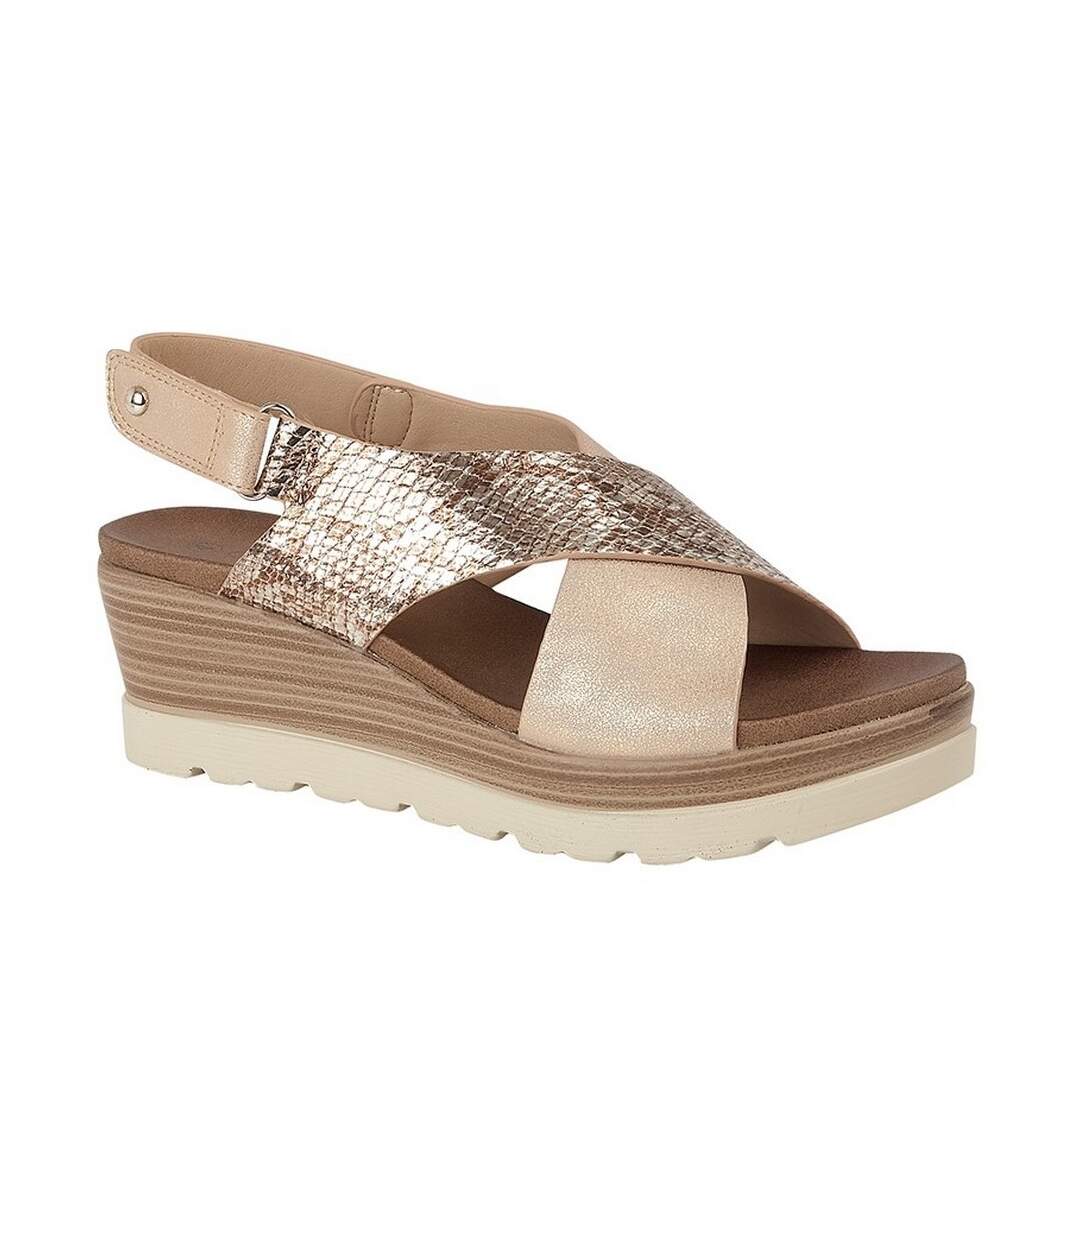 Cipriata Womens/Ladies Fiore Crossover High Wedge Sandals (Champagne/Gold) - UTDF1754